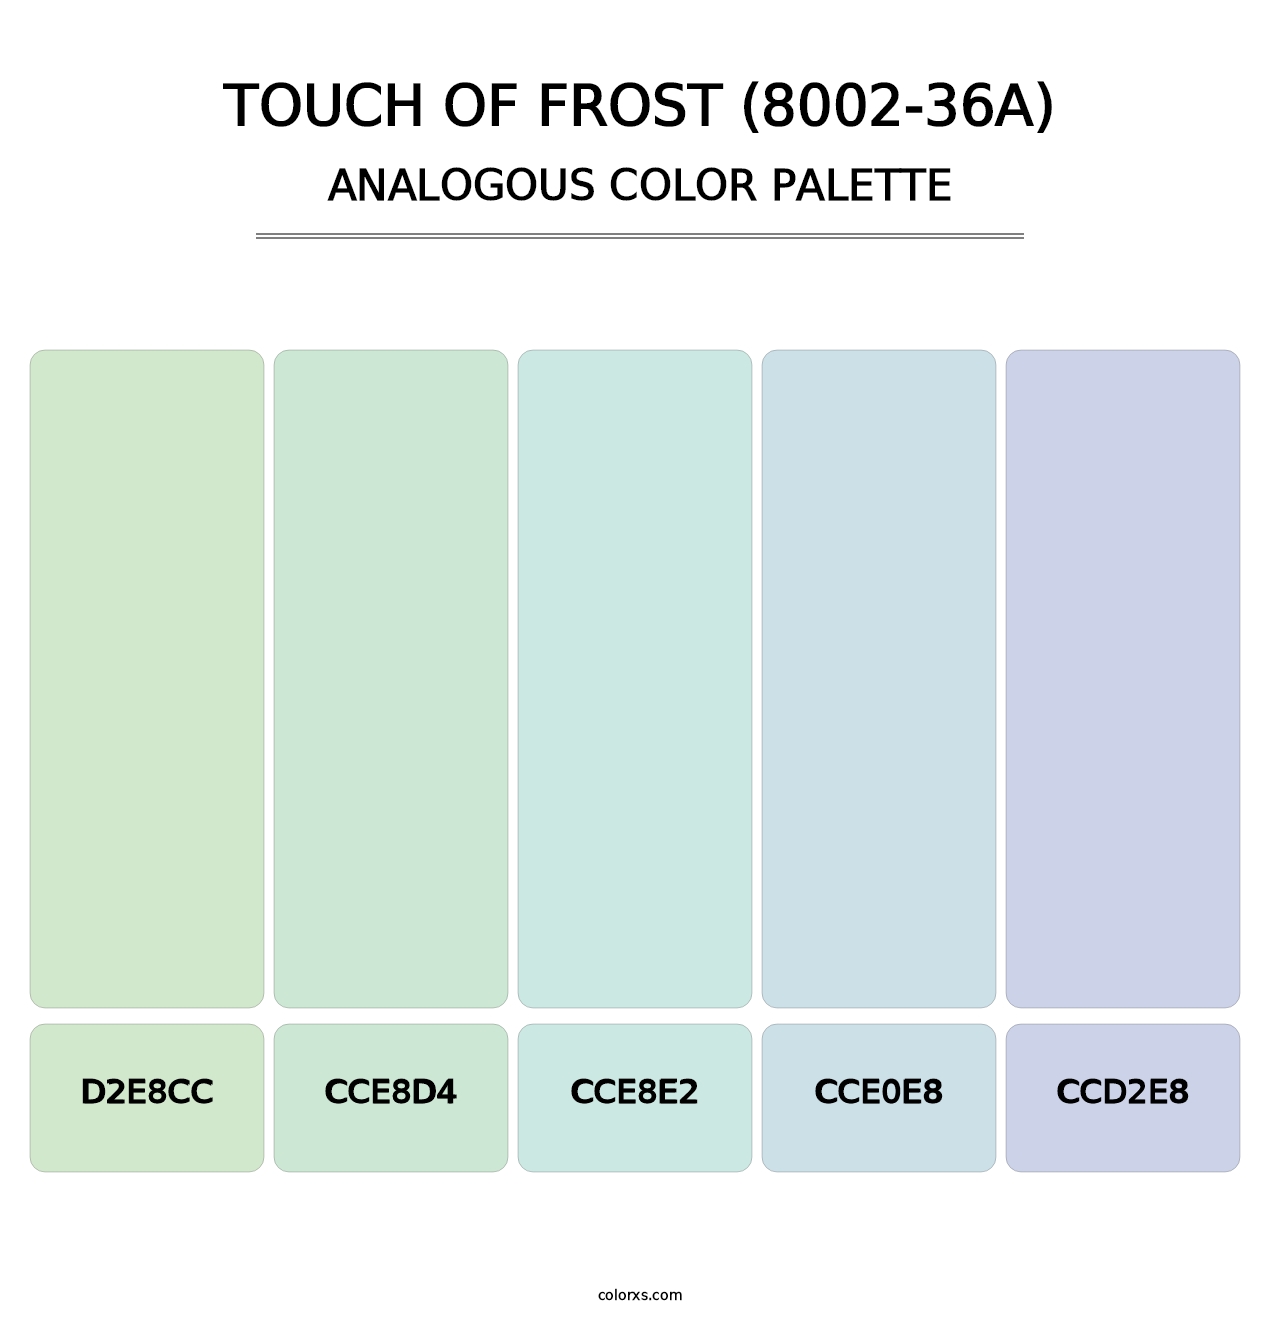 Touch of Frost (8002-36A) - Analogous Color Palette